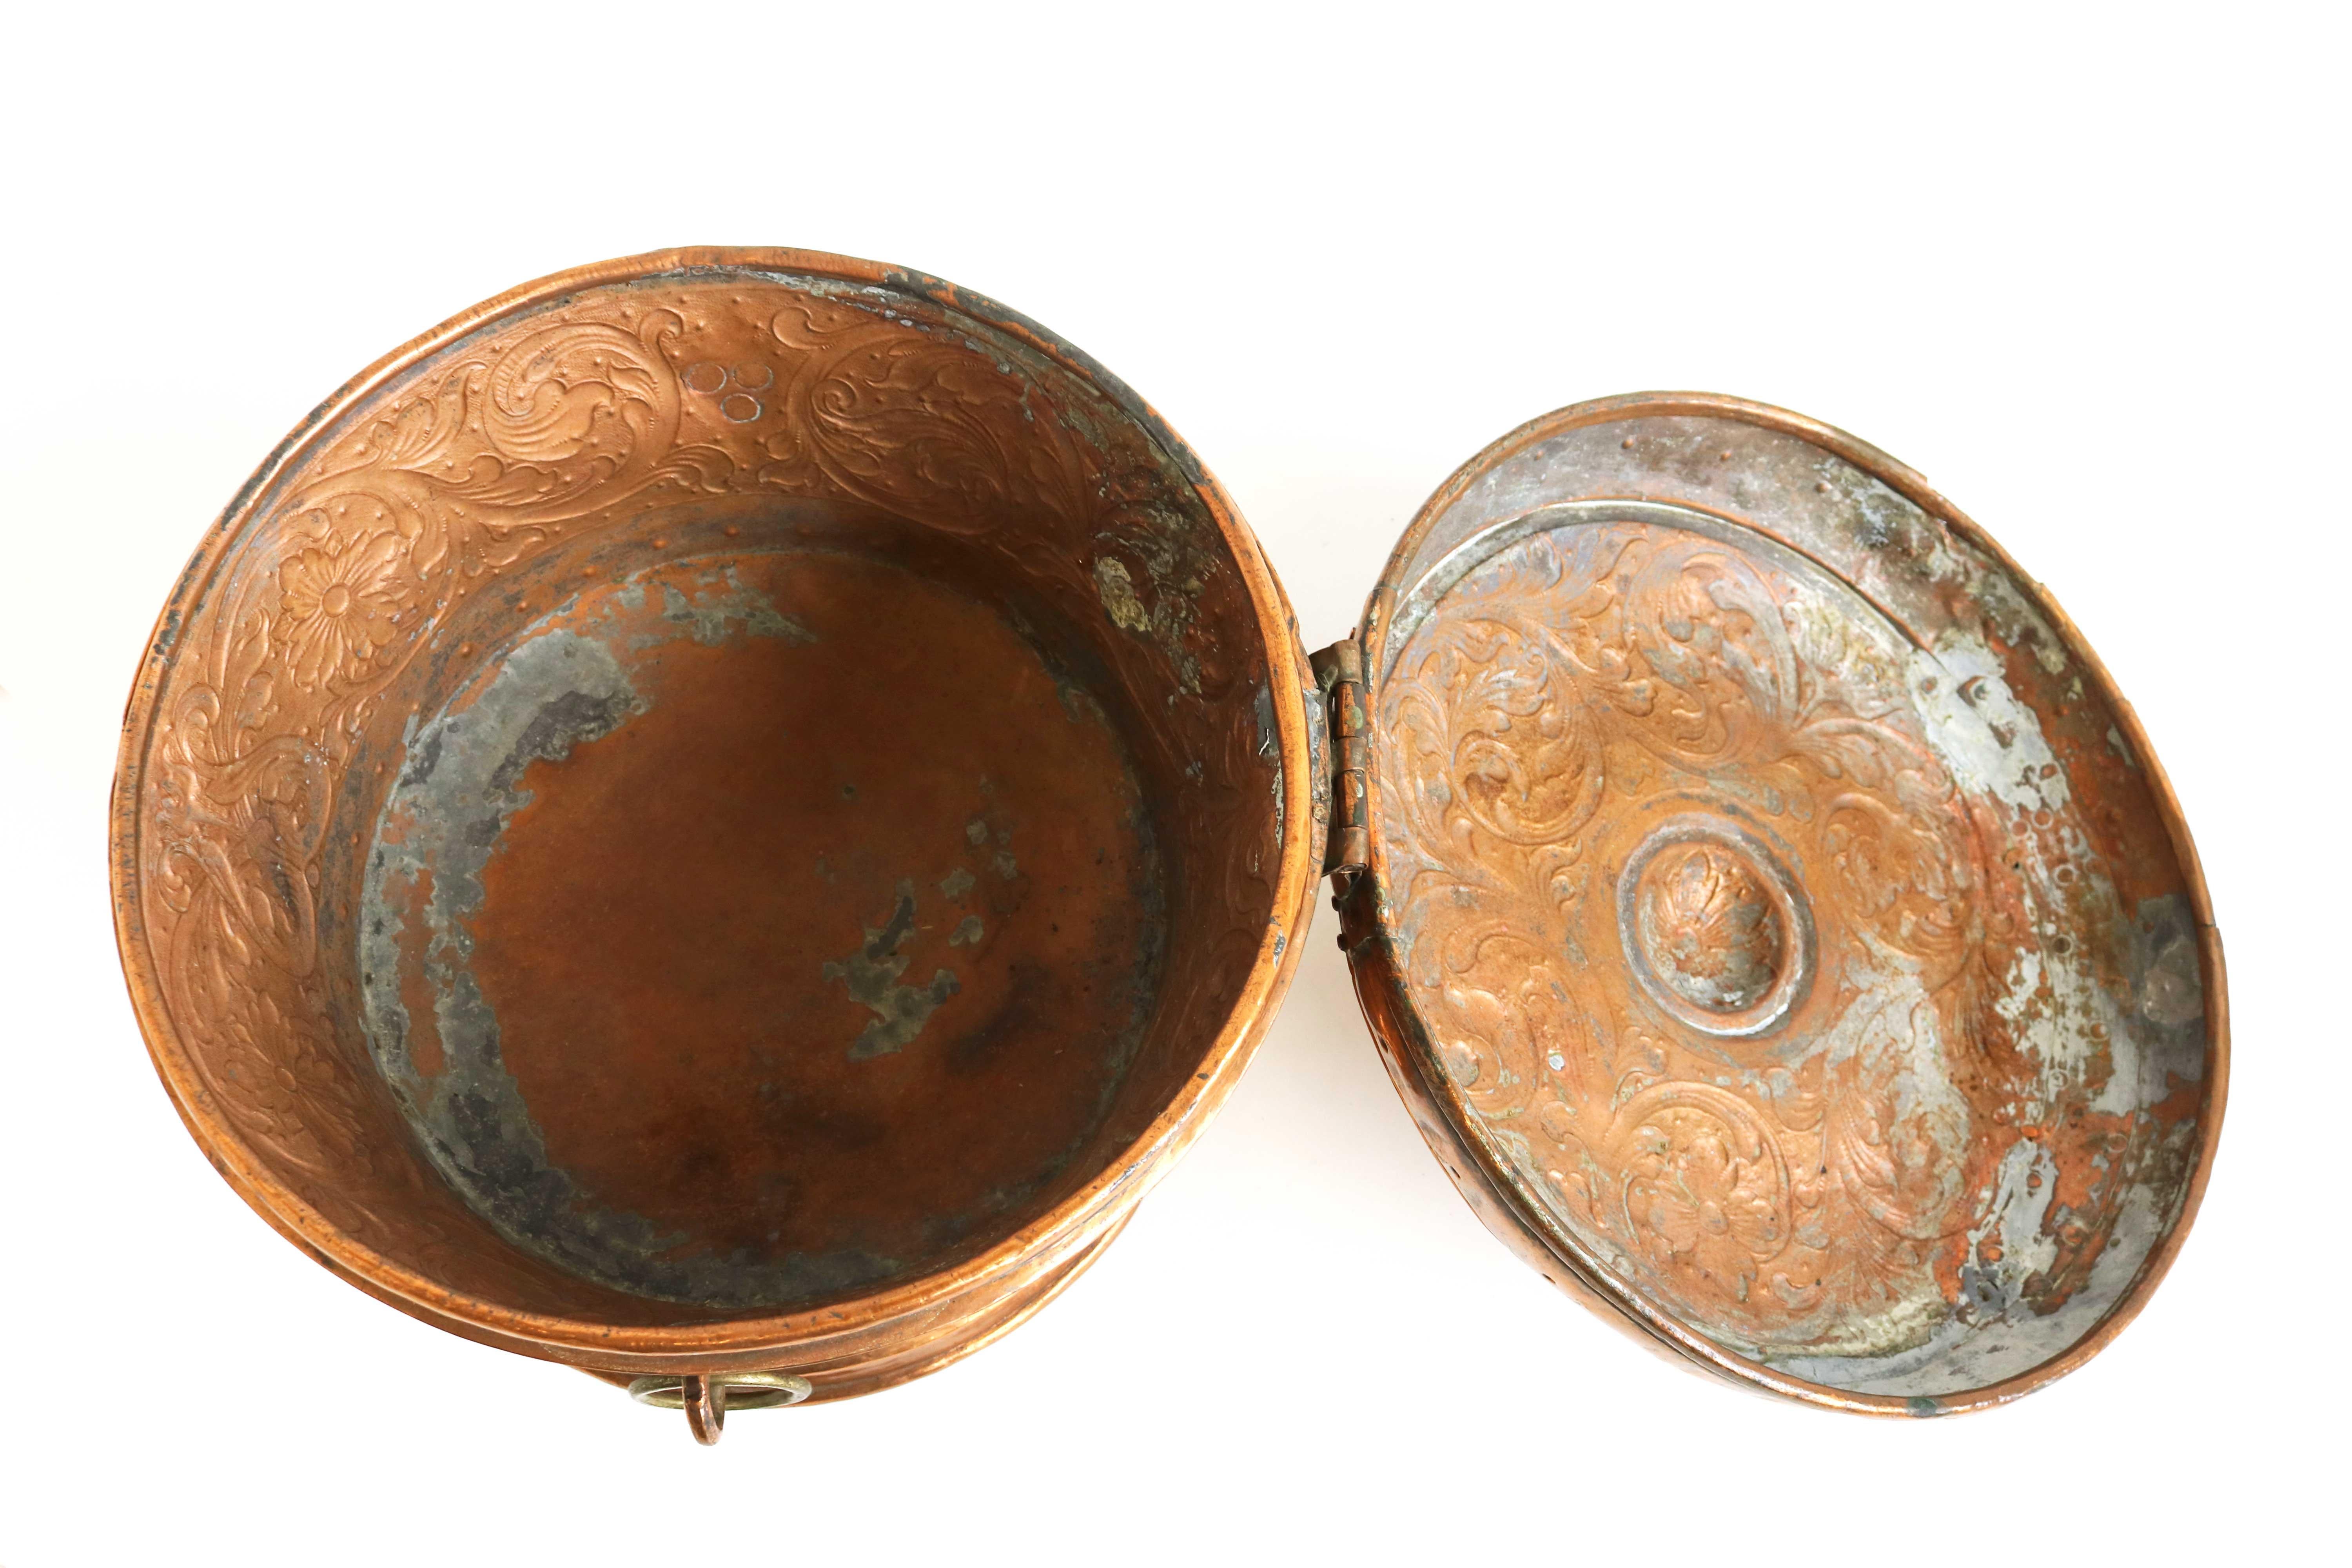 Decorated Dutch Antique Copper Bowl / Pot with Lid, 18th Century, Dated 1750 For Sale 11